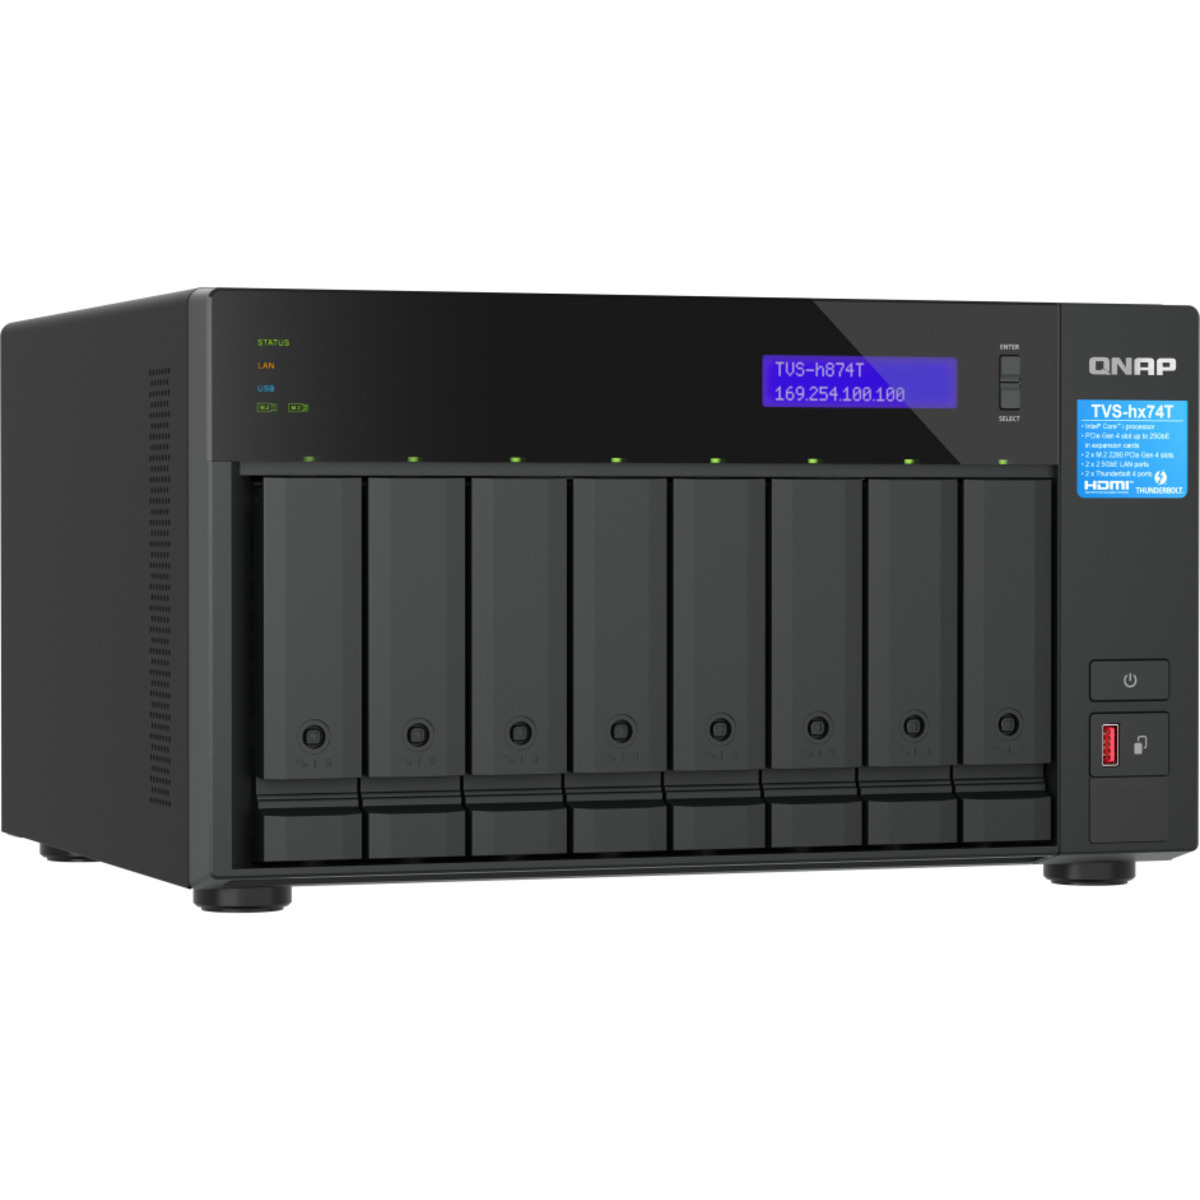 QNAP TVS-h874T Core i9 Thunderbolt 4 48tb 8-Bay Desktop Multimedia / Power User / Business DAS-NAS - Combo Direct + Network Storage Device 6x8tb Seagate IronWolf ST8000VN004 3.5 7200rpm SATA 6Gb/s HDD NAS Class Drives Installed - Burn-In Tested TVS-h874T Core i9 Thunderbolt 4